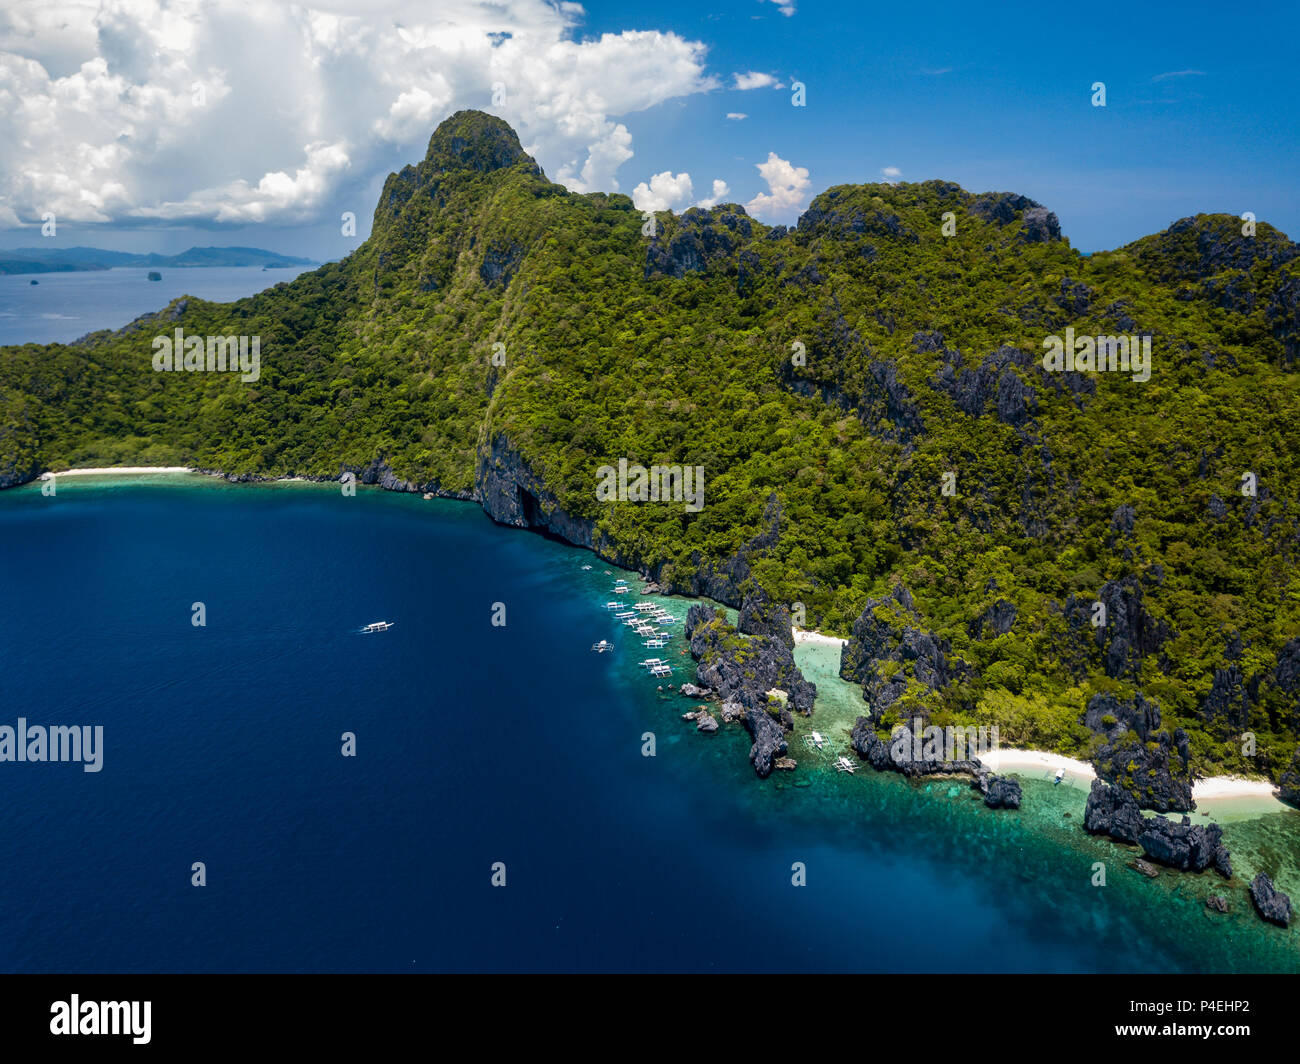 Aerial view of a beautiful tropical island with cliffs and mountains in the Bacuit Archipelago, Philippines Stock Photo